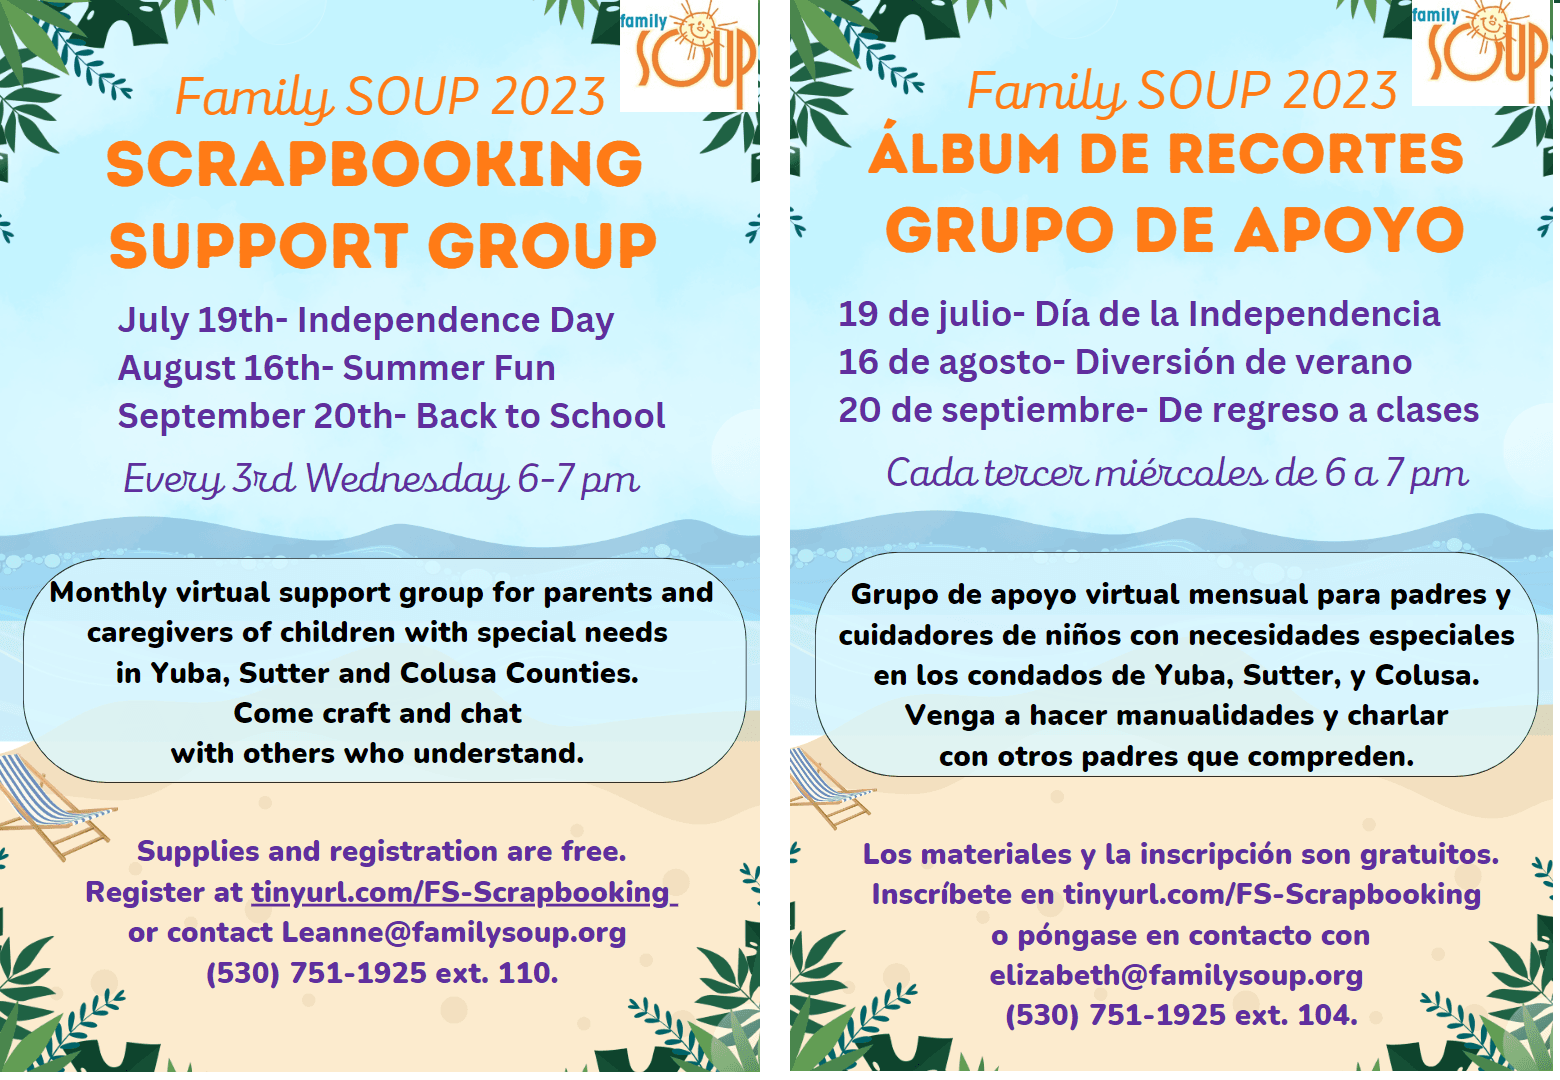 Support Group for Parents & Caregivers of Children with Special Needs